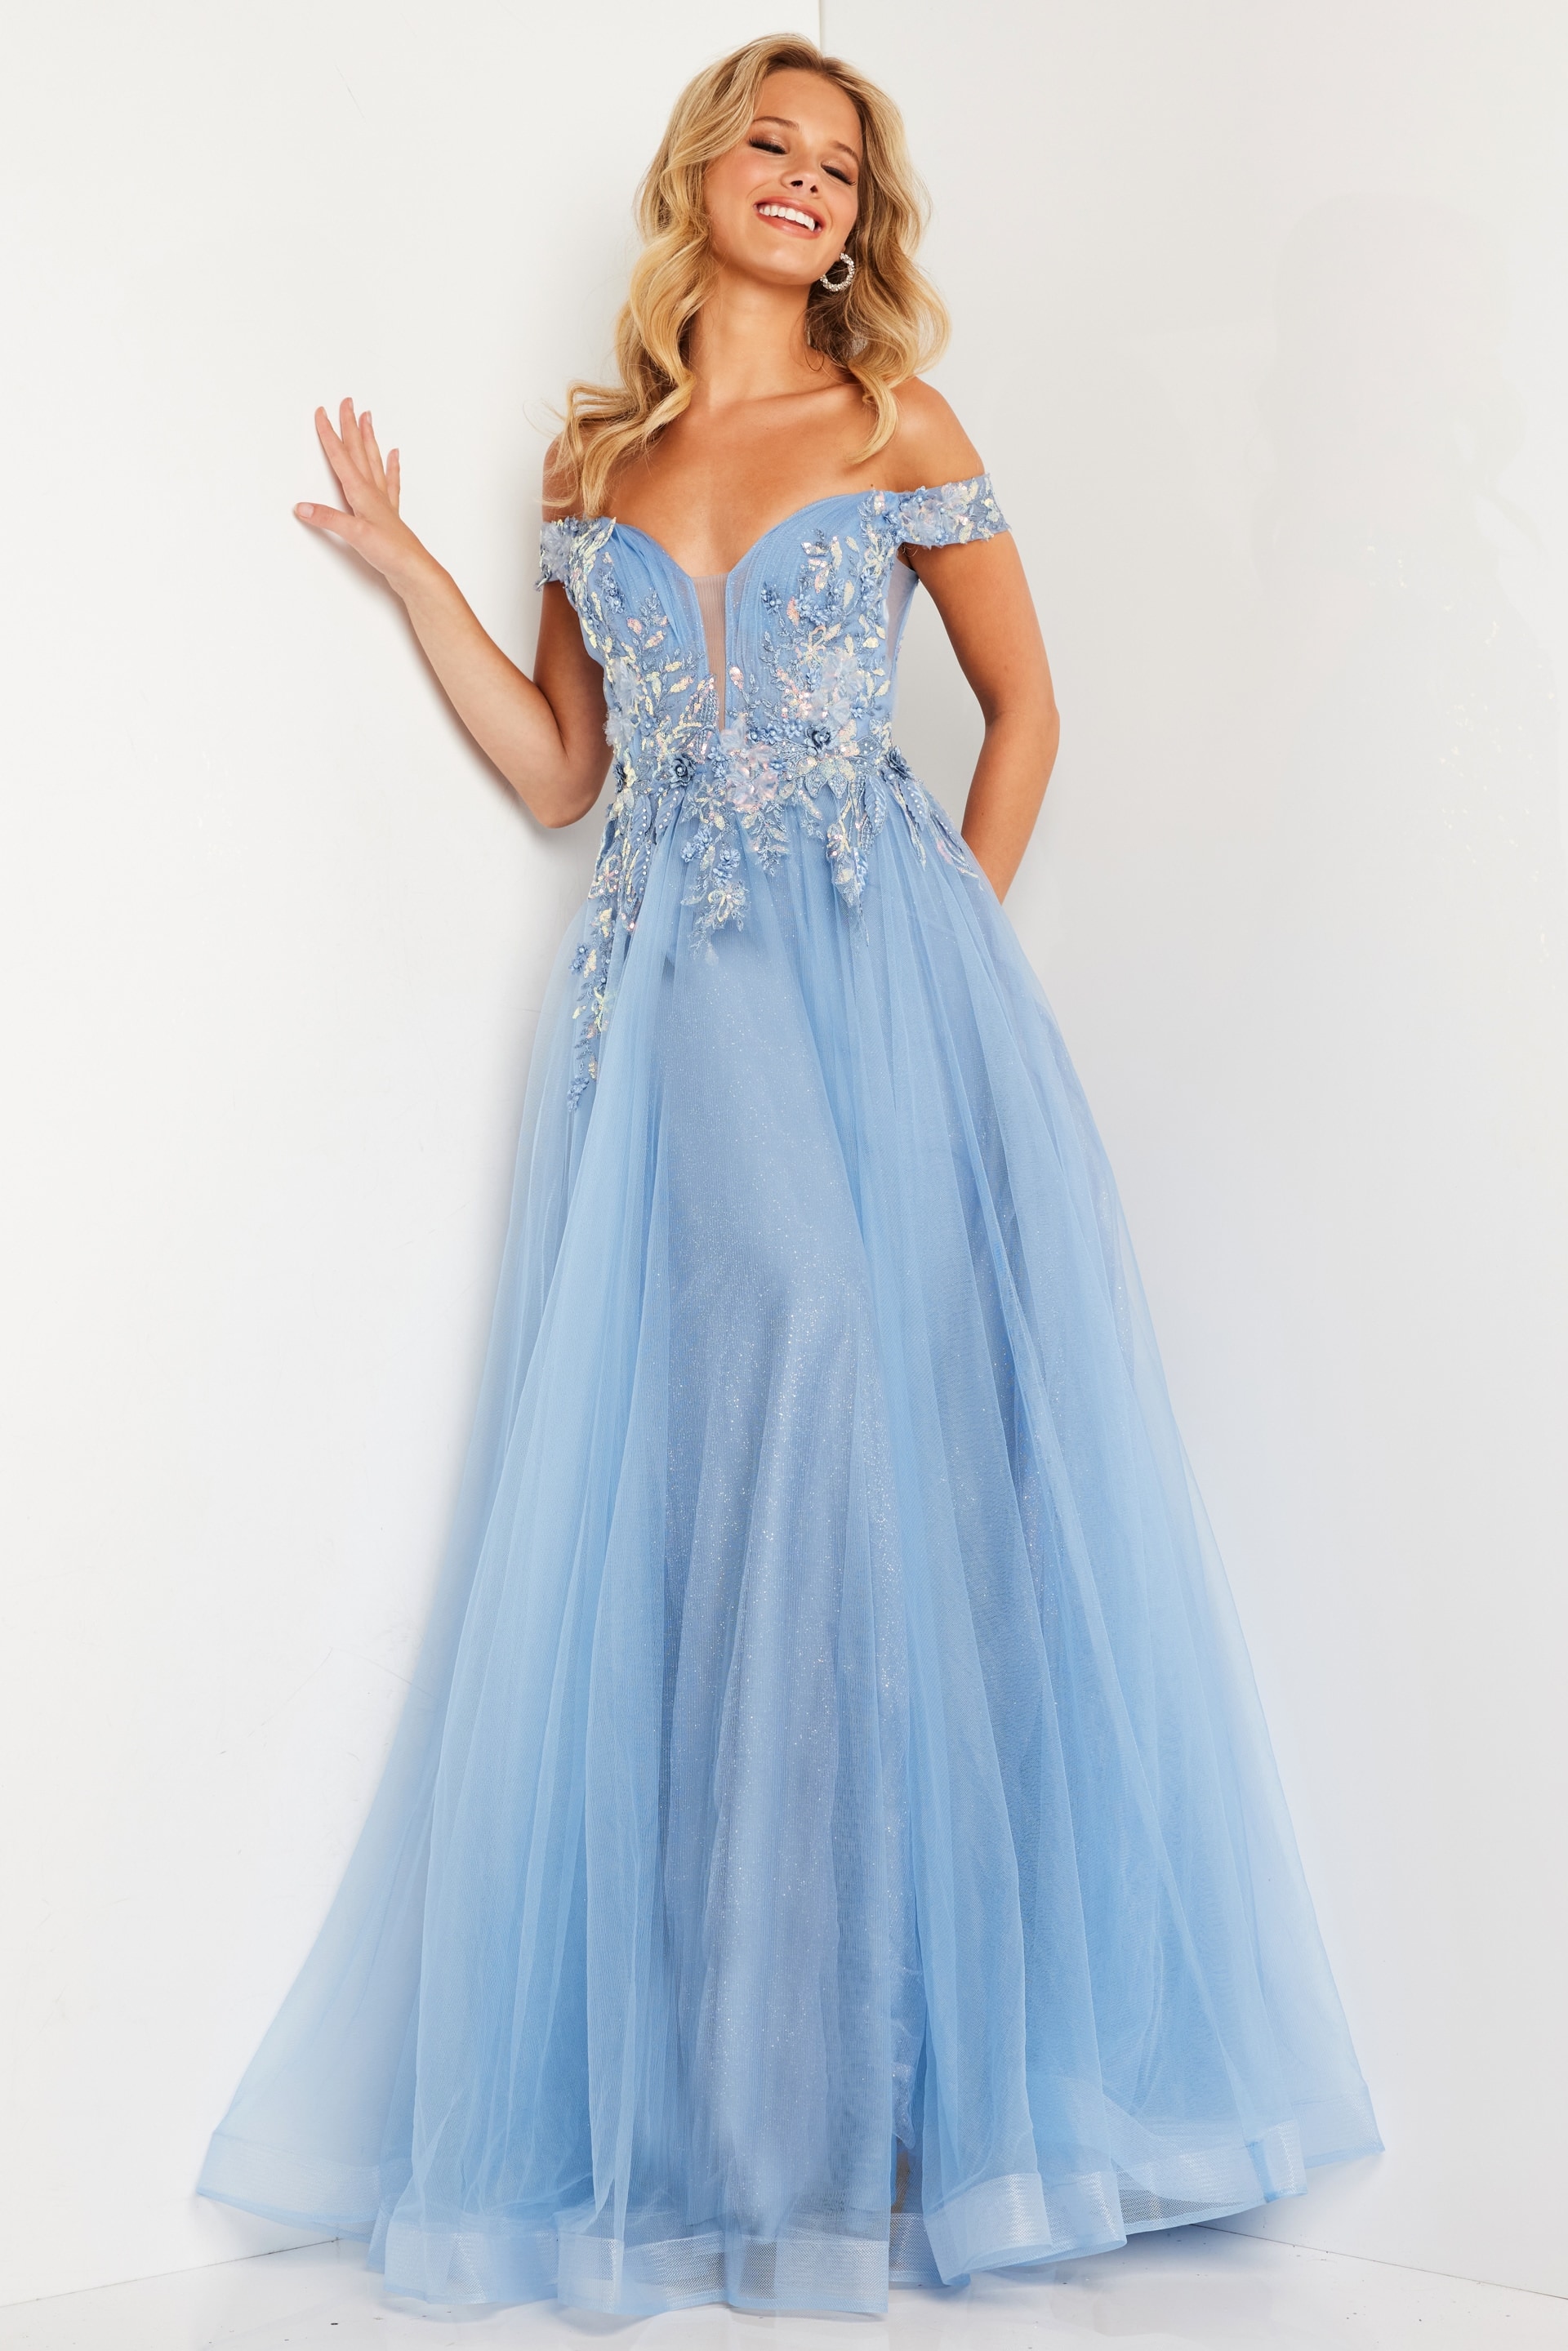 JVN23698 Sky Blue Tulle Plunging Neck Gown